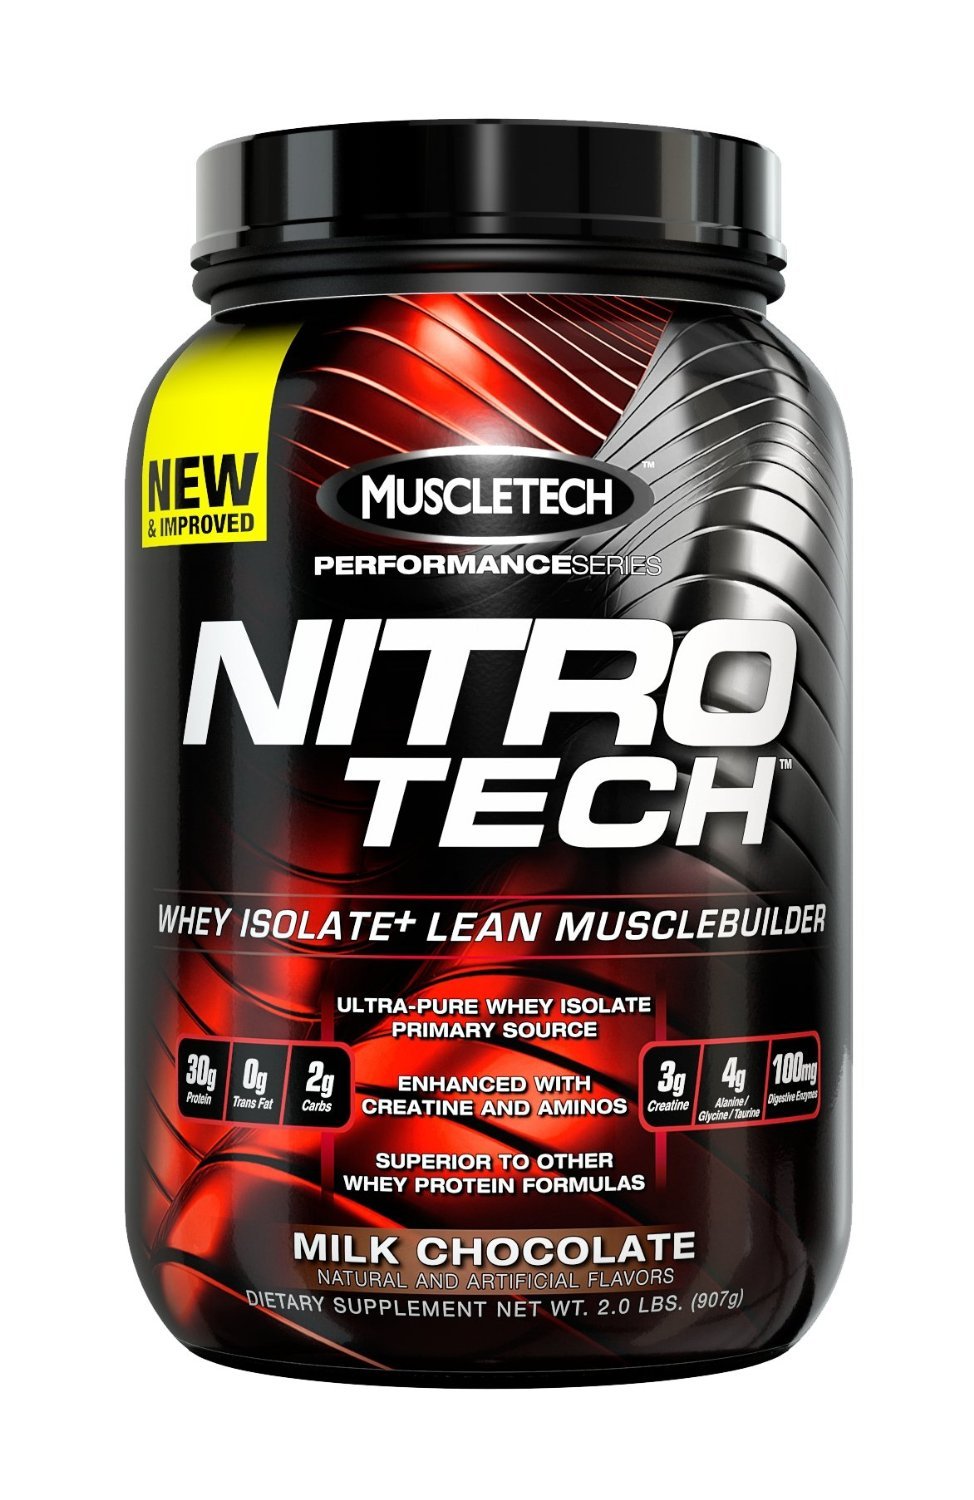 Nitro Tech Performance Series, 907 g, MuscleTech. Whey Isolate. Lean muscle mass Weight Loss recovery Anti-catabolic properties 